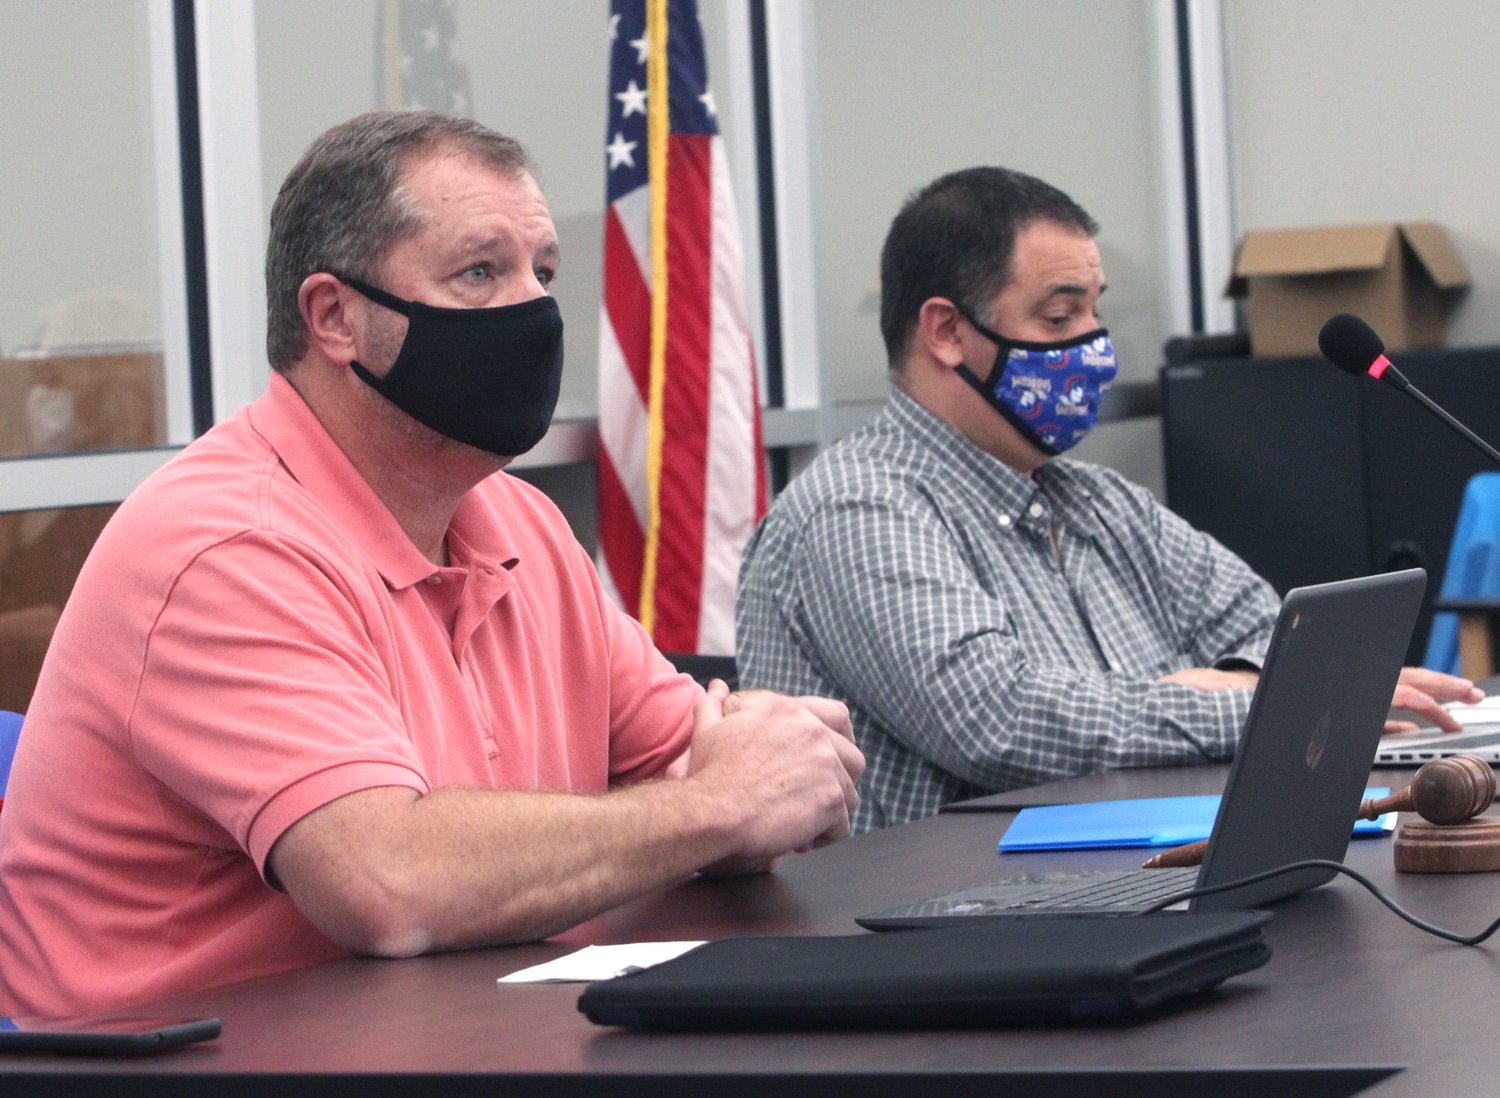 Moberly Public School Board President Bobby Riley (left) talks about a revised COVID-19 guideline document proposal issued by the Randolph County Health Department during a Tuesday, Nov. 10 school board meeting. Sitting to the right is Superintendent Dr. Tim Roling.